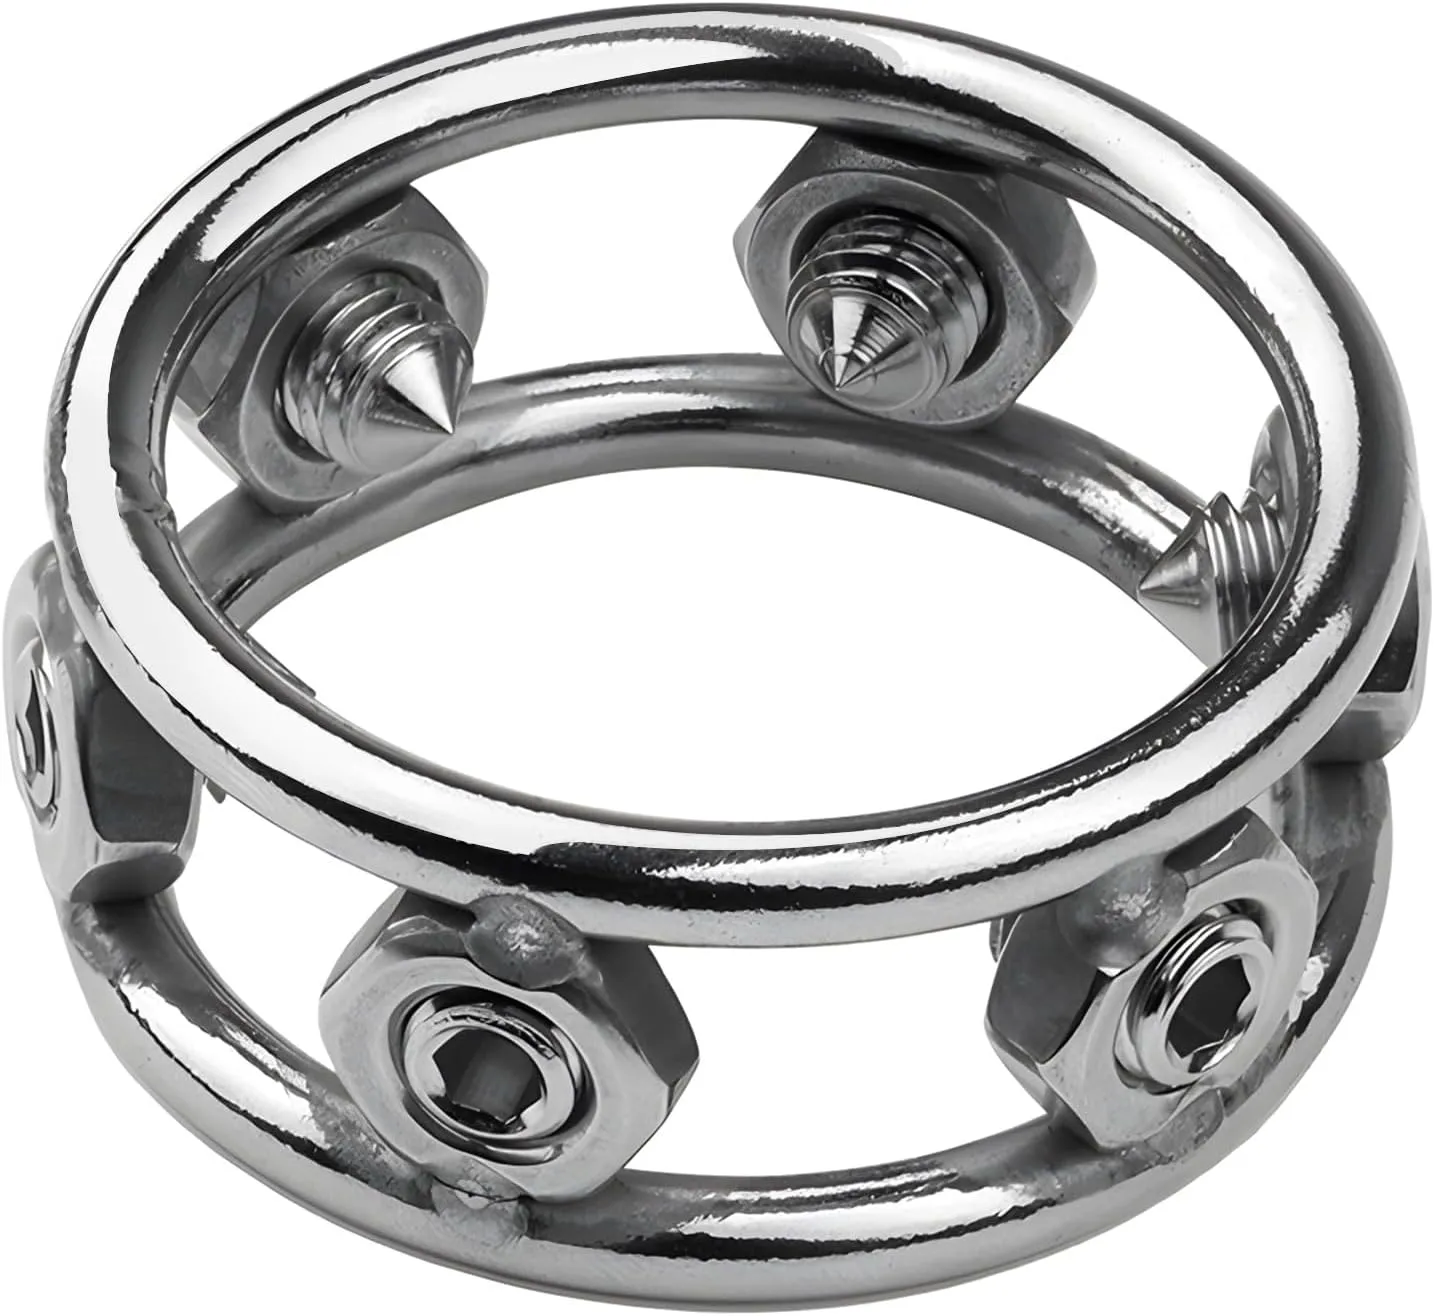 Stainless Steel Cock Ring Penis Ring with 4 Spikes Metal Glans Ring Screw Chastity Device Harder Stronger Erection Delay Enhancing Loop Ring SM Sex Toy for Men